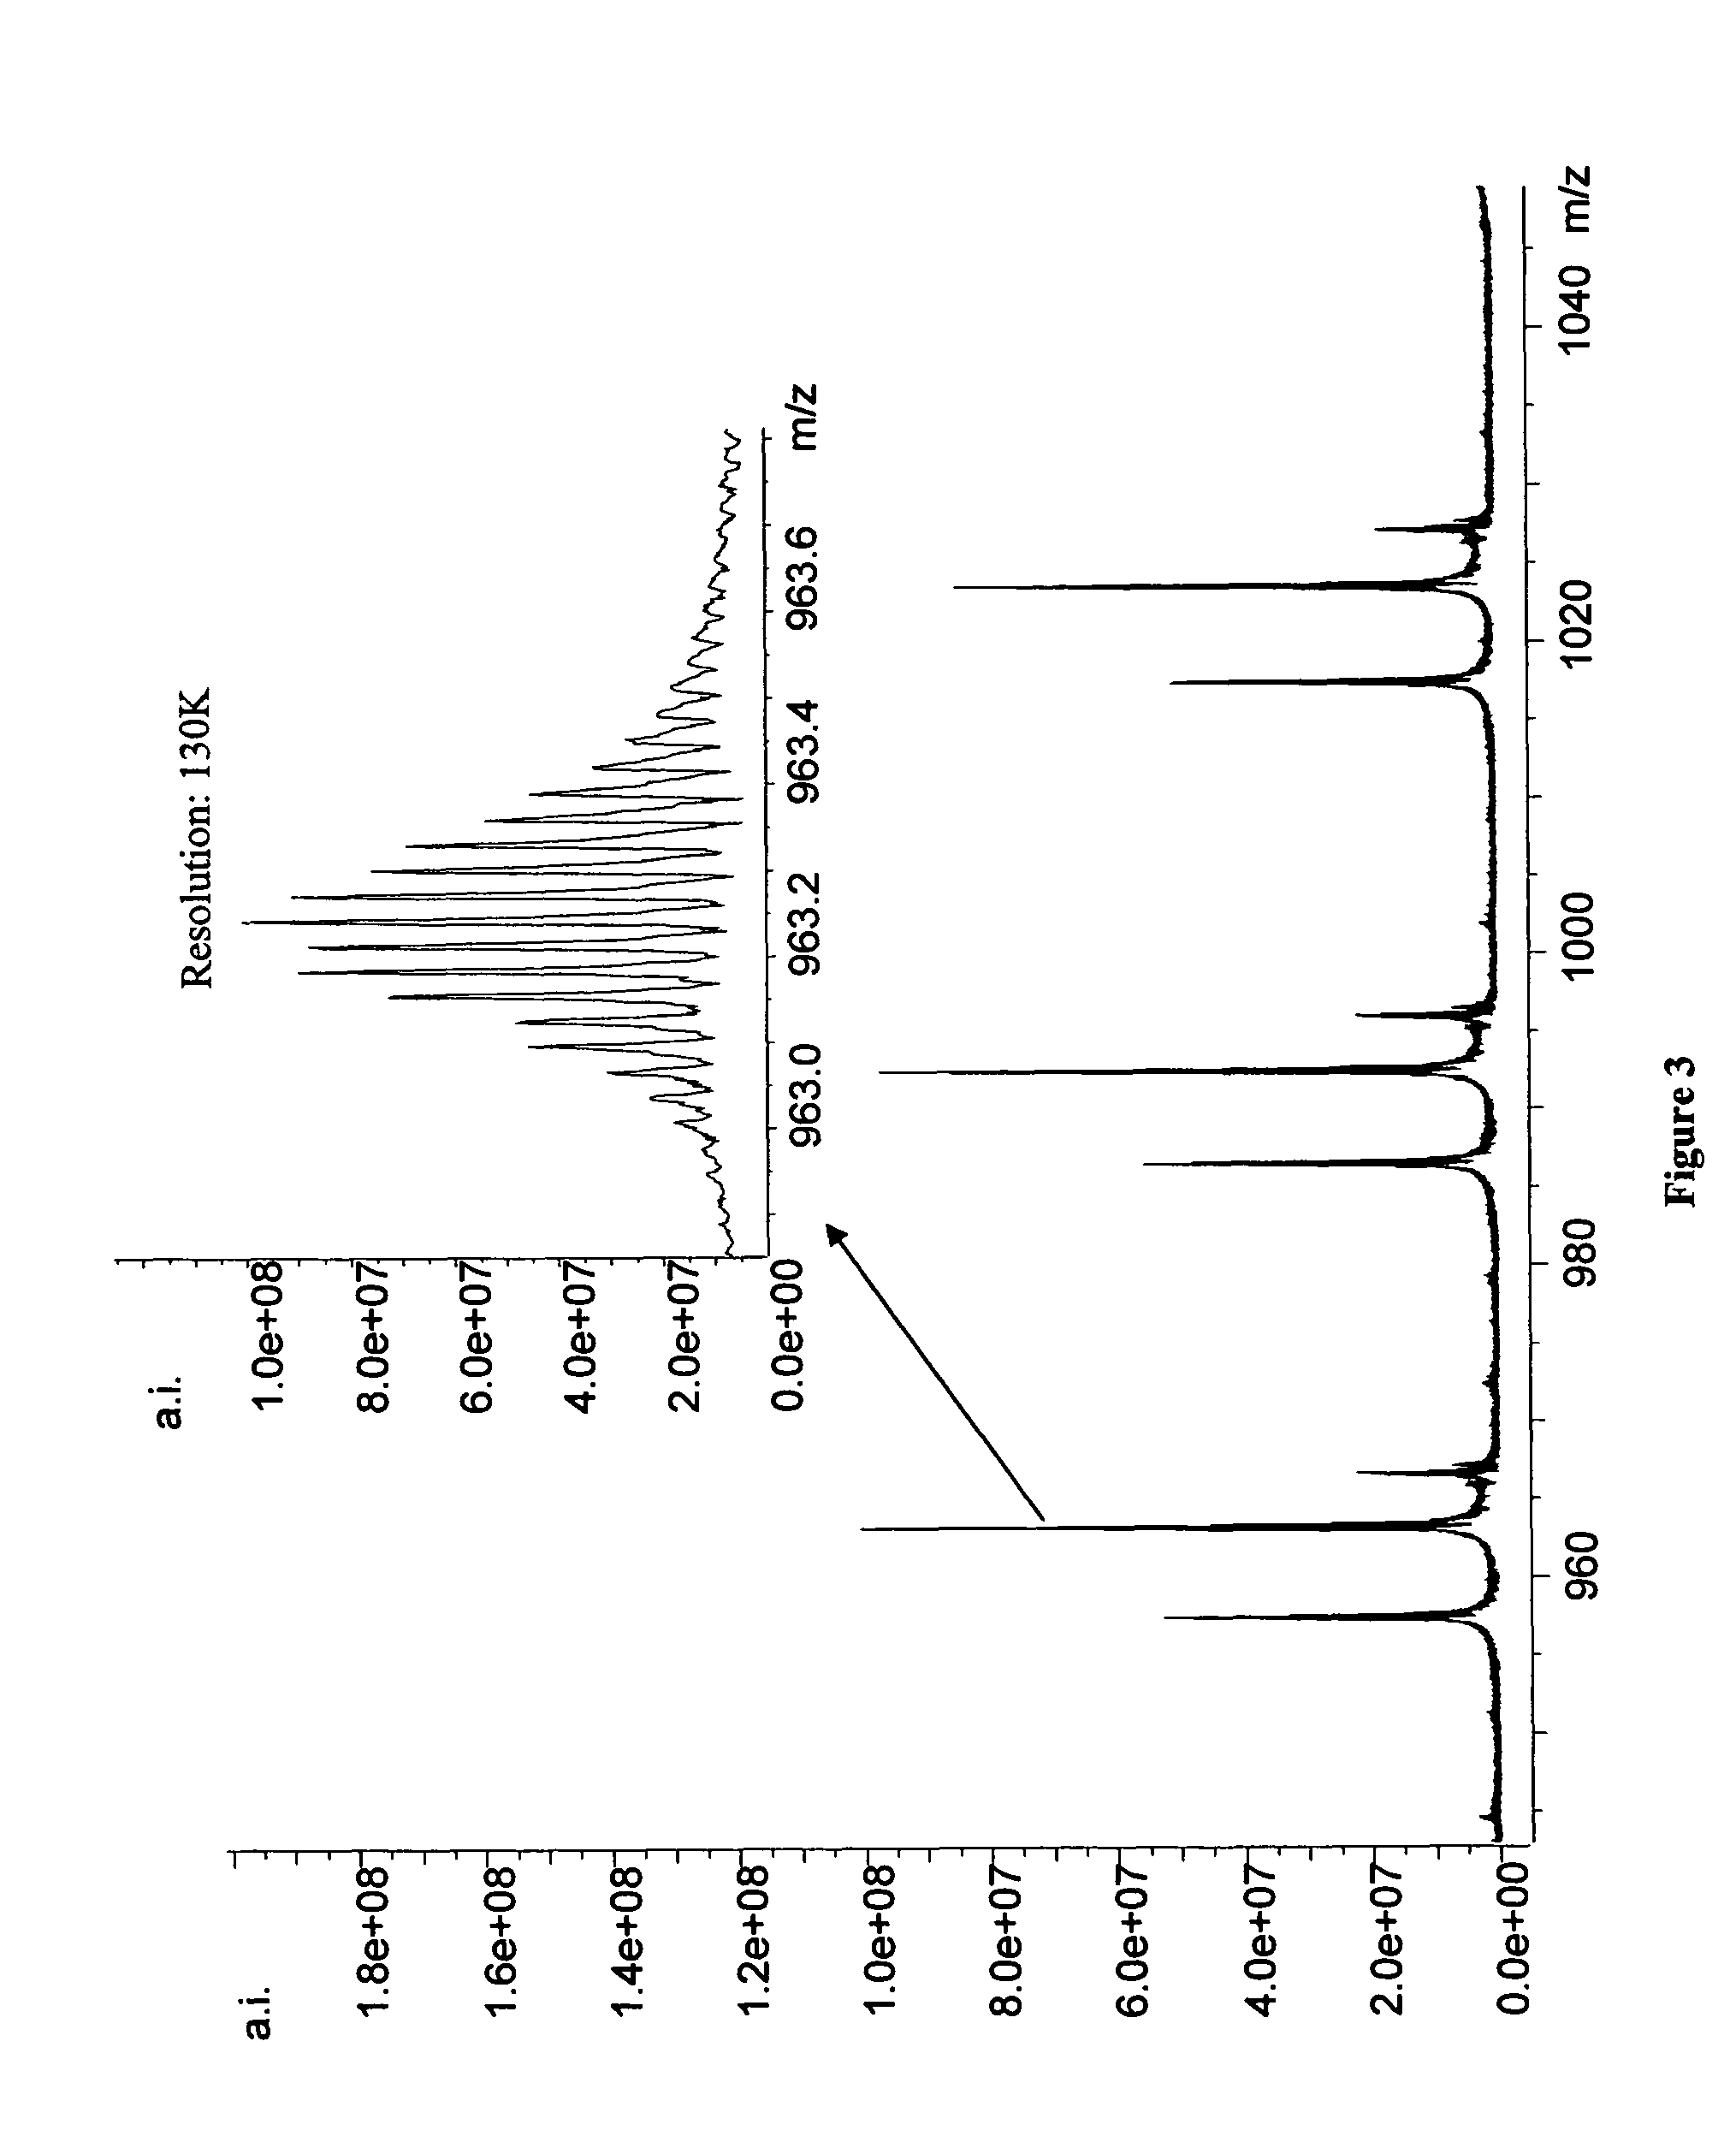 Methods for rapid purification of nucleic acids for subsequent analysis by mass spectrometry by solution capture